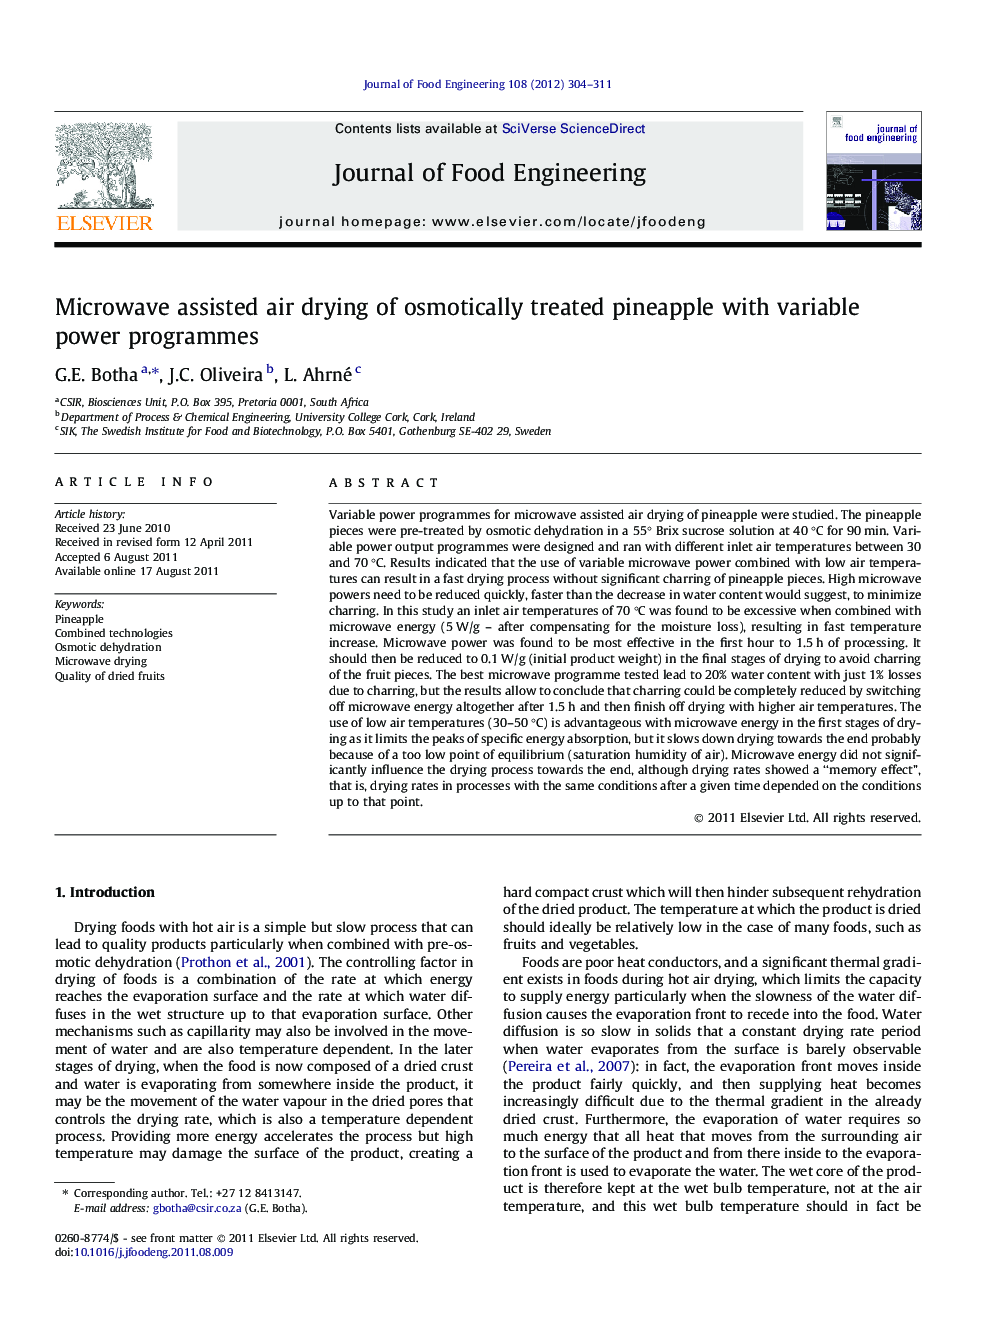 Microwave assisted air drying of osmotically treated pineapple with variable power programmes